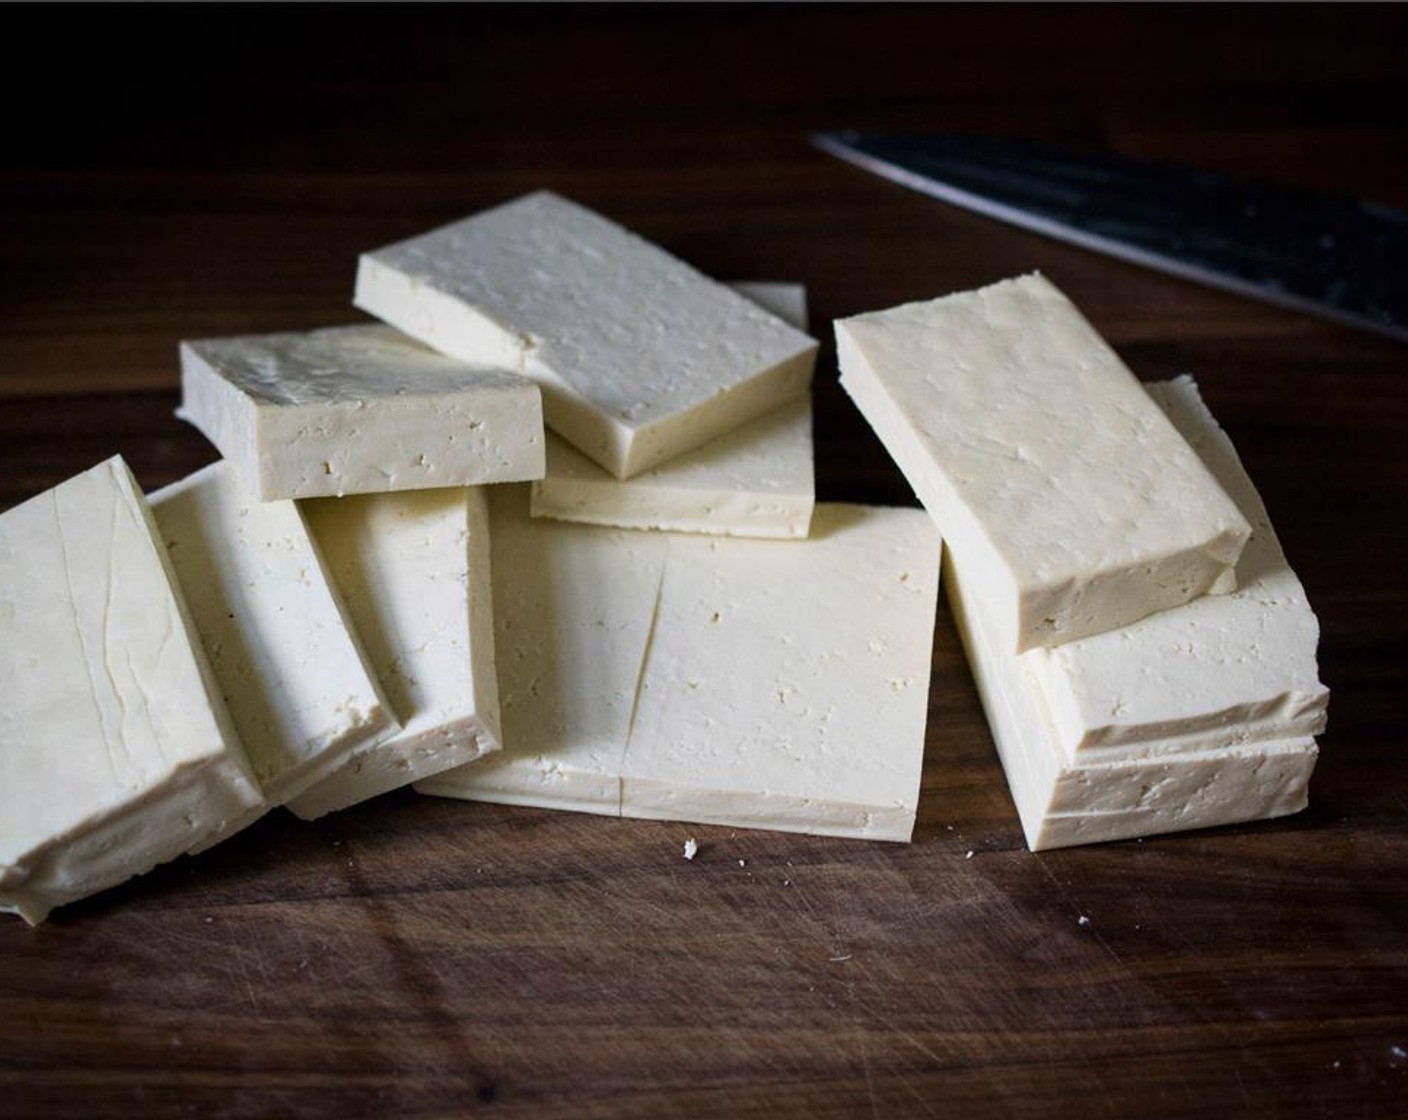 step 1 Using a clean tea towel, firmly press the block of Extra Firm Tofu (1.3 lb) to remove the excess moisture. Cut the tofu into 1/2-inch slices. Then cut in half (around 2-3 inches across).